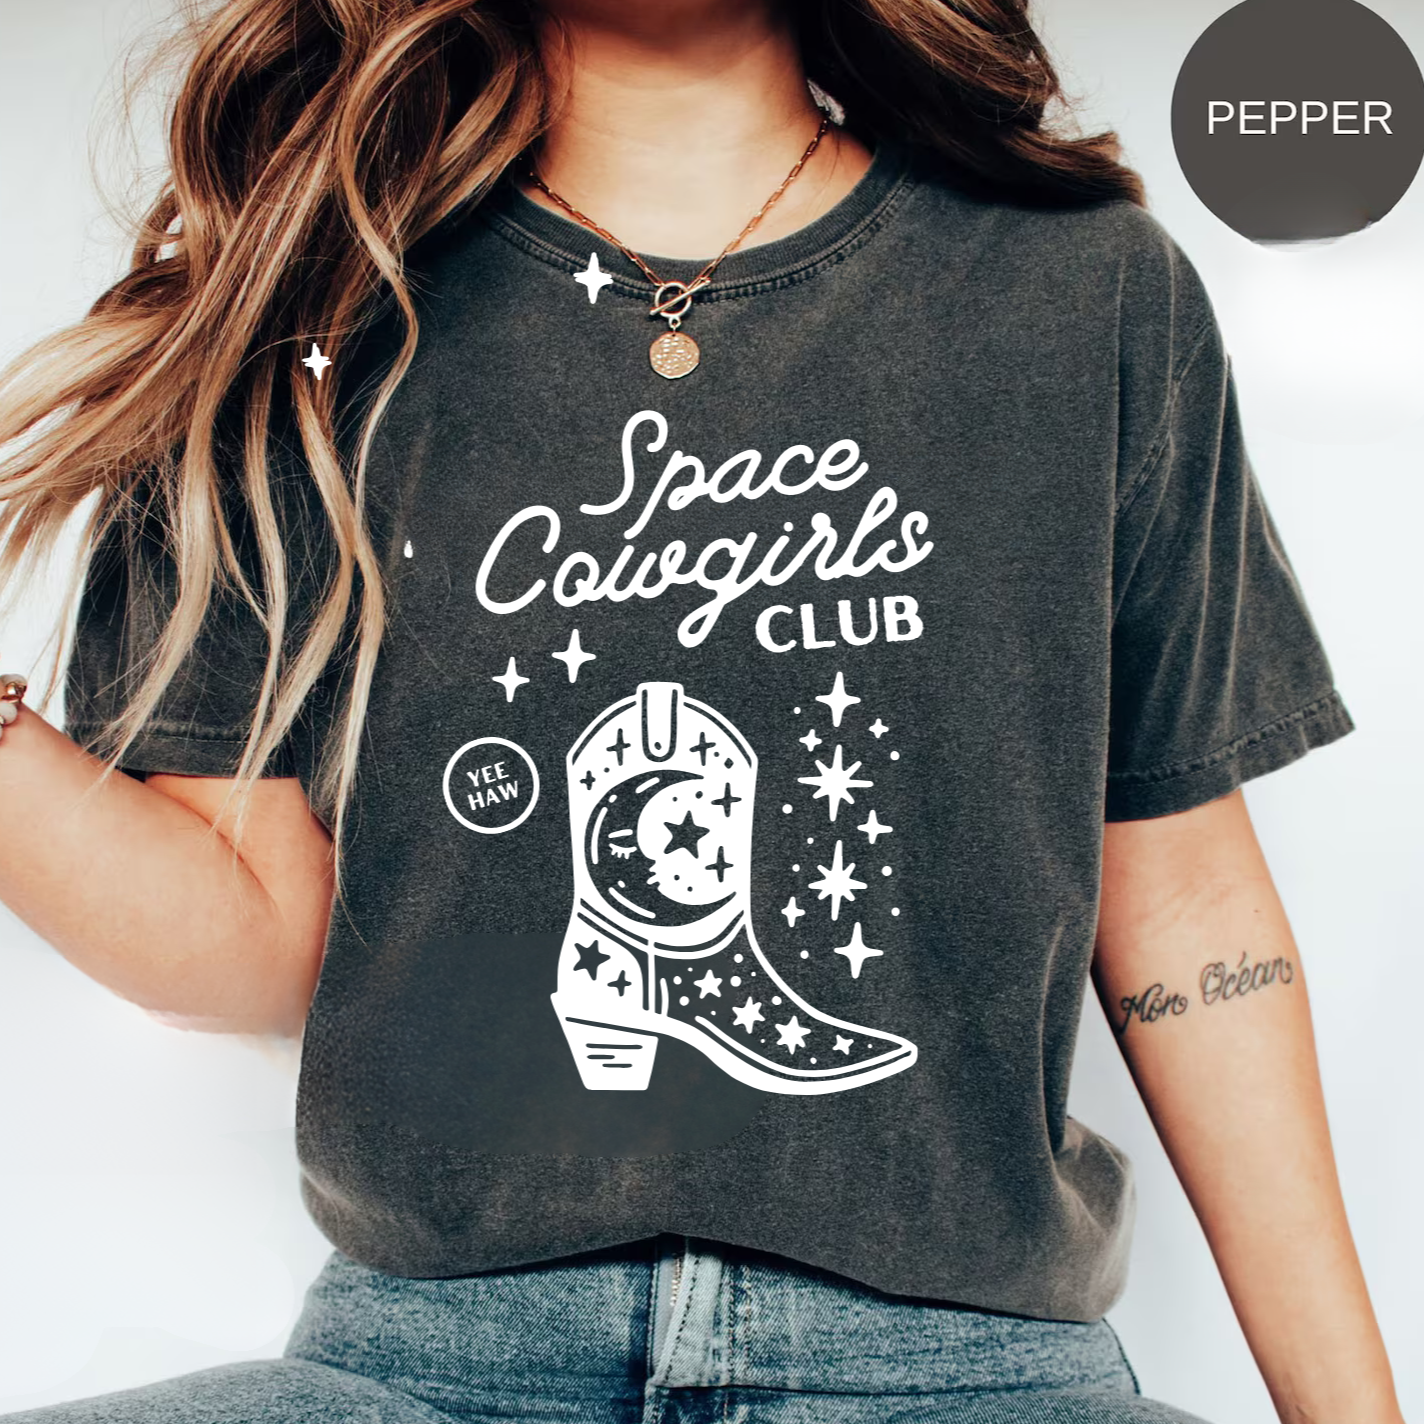 Space Cowgirls Oversized T-Shirt - Comfort Colors 1717, Distressed Look, Pepper Color, 100% Ring-Spun Cotton